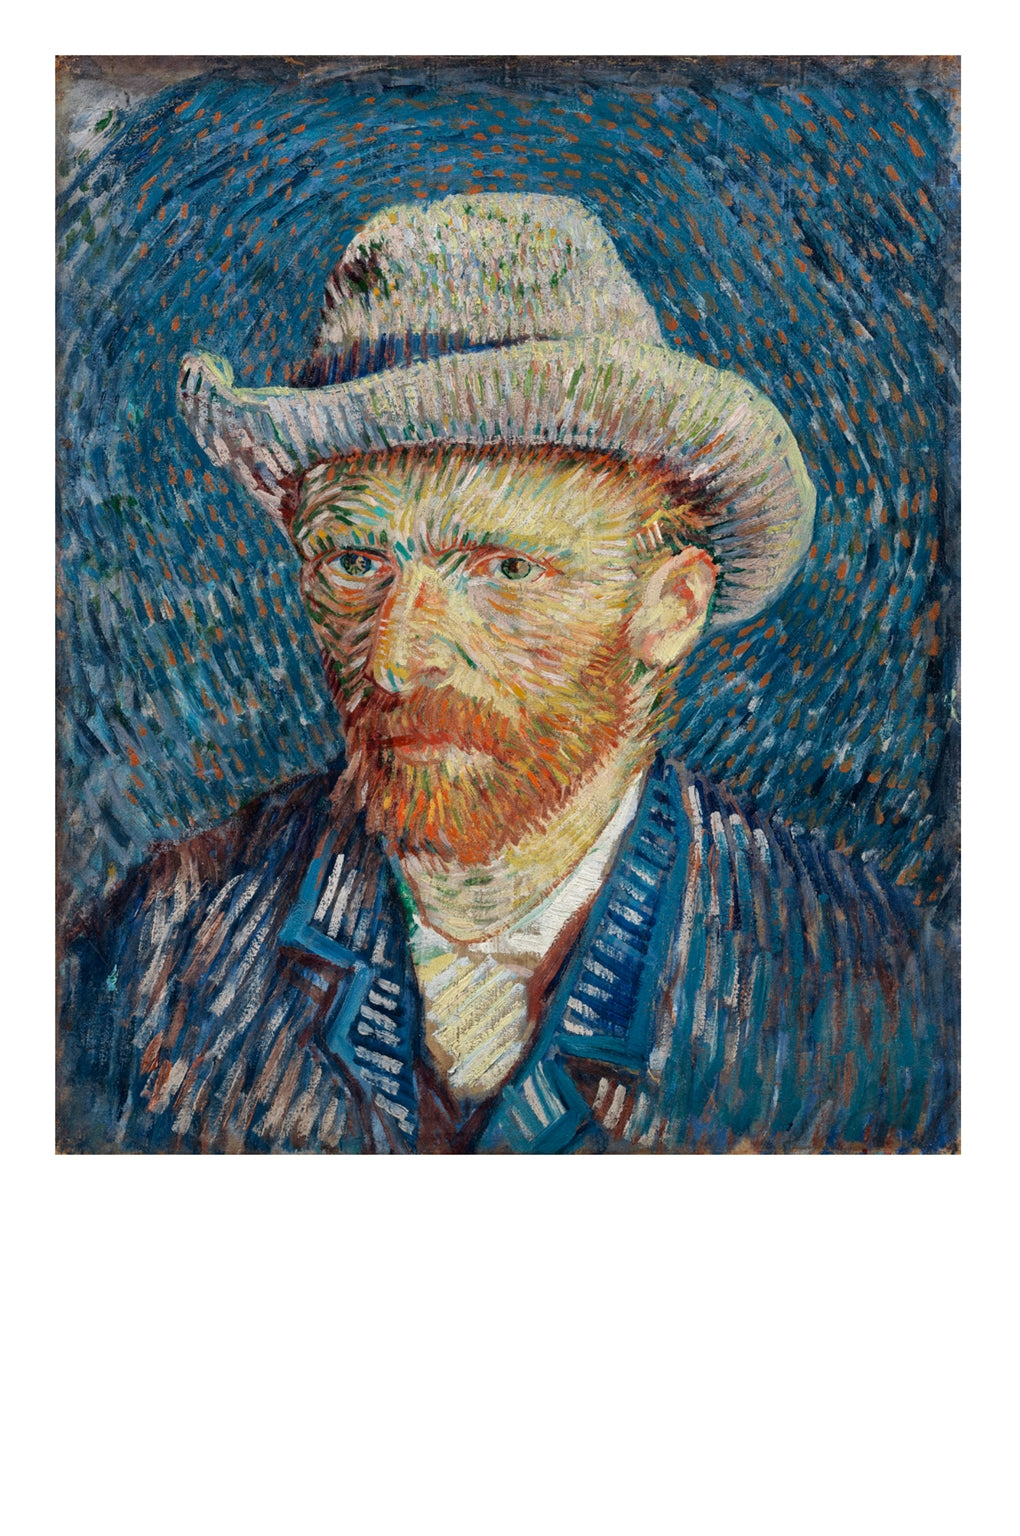 Vincent Van Gogh: 50 Masterpieces Explored by Sally Grant